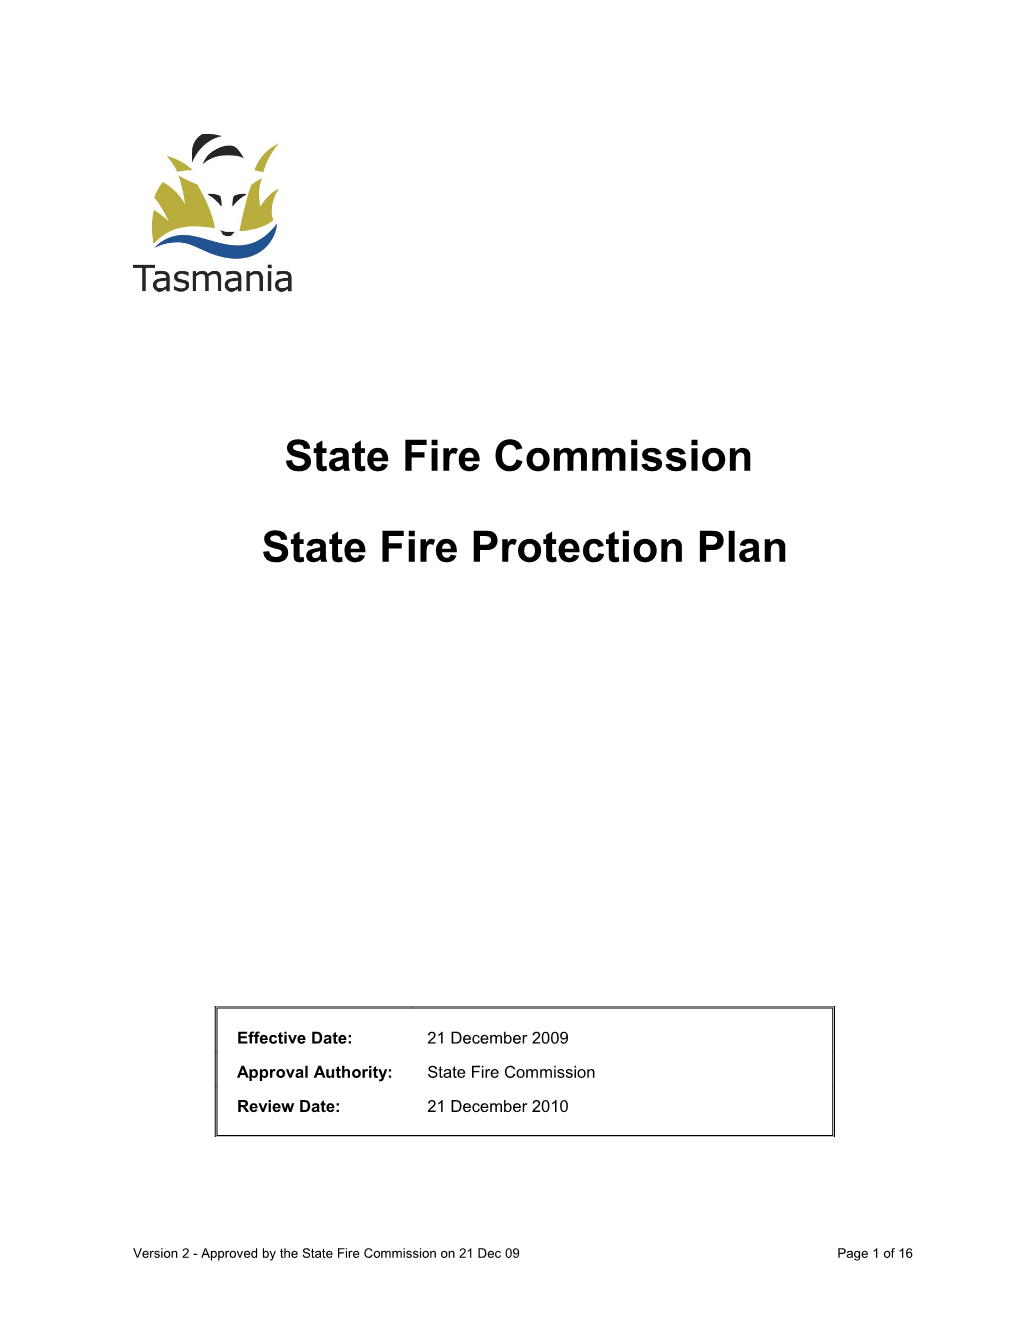 State Fire Protection Plan